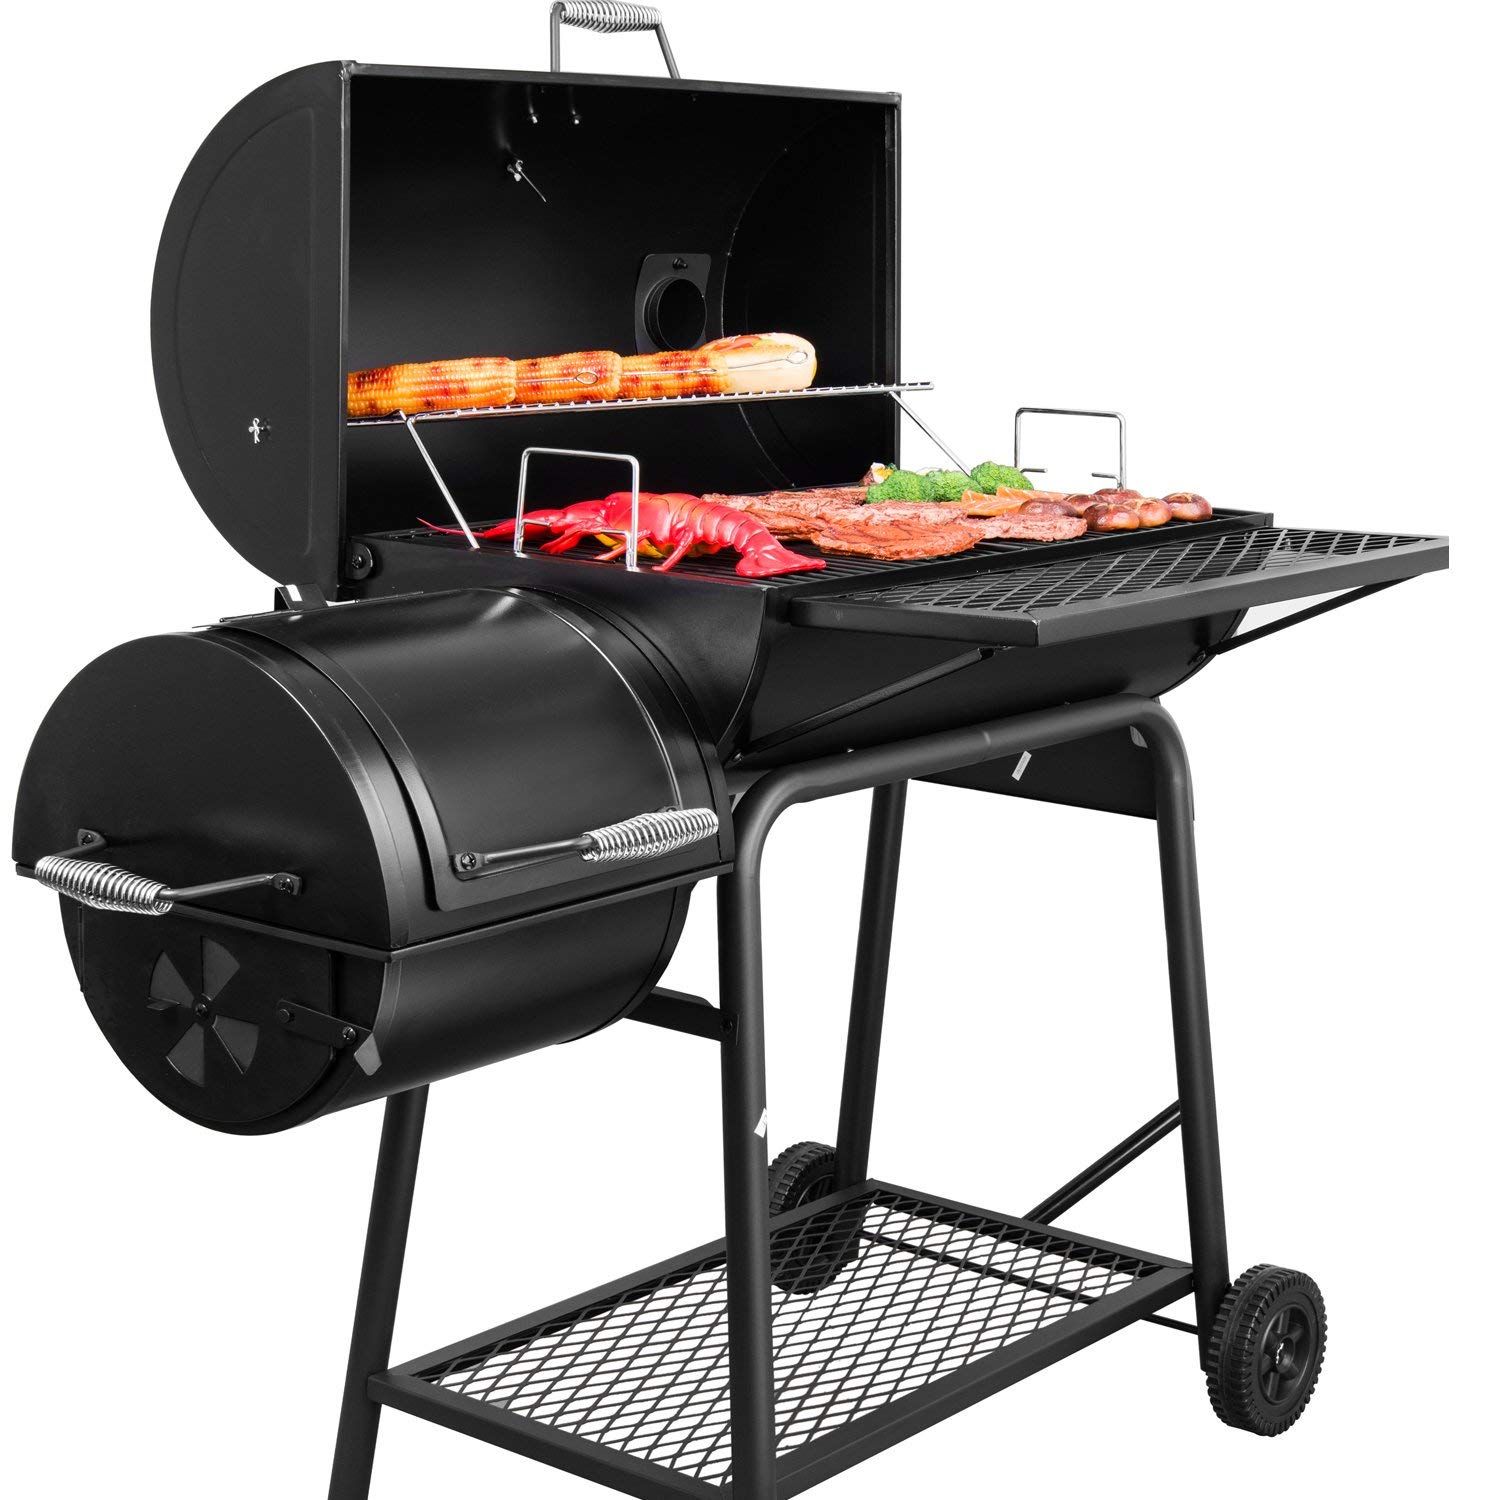 Top Grill Electric - Buy Electric, Charcoal and Propane Grills At Best Prices